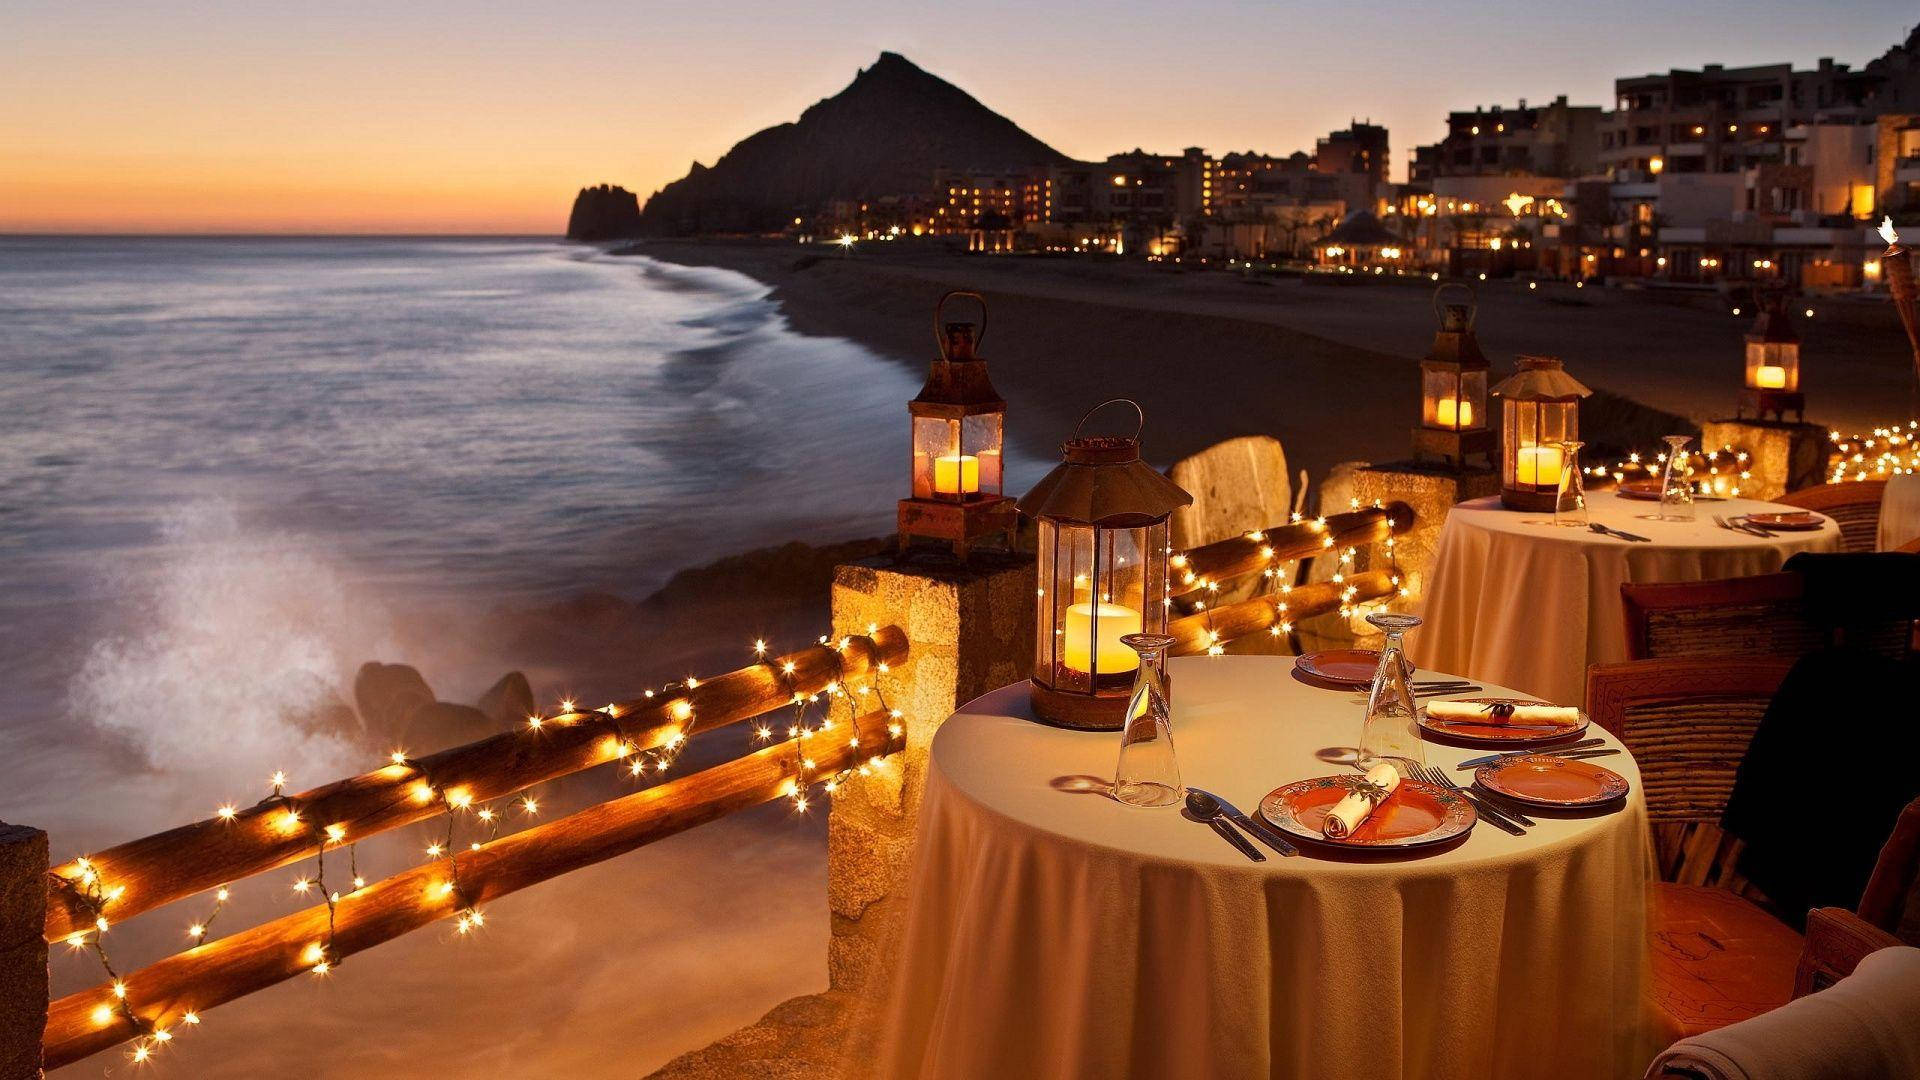 Dinner By The Sea Wallpaper